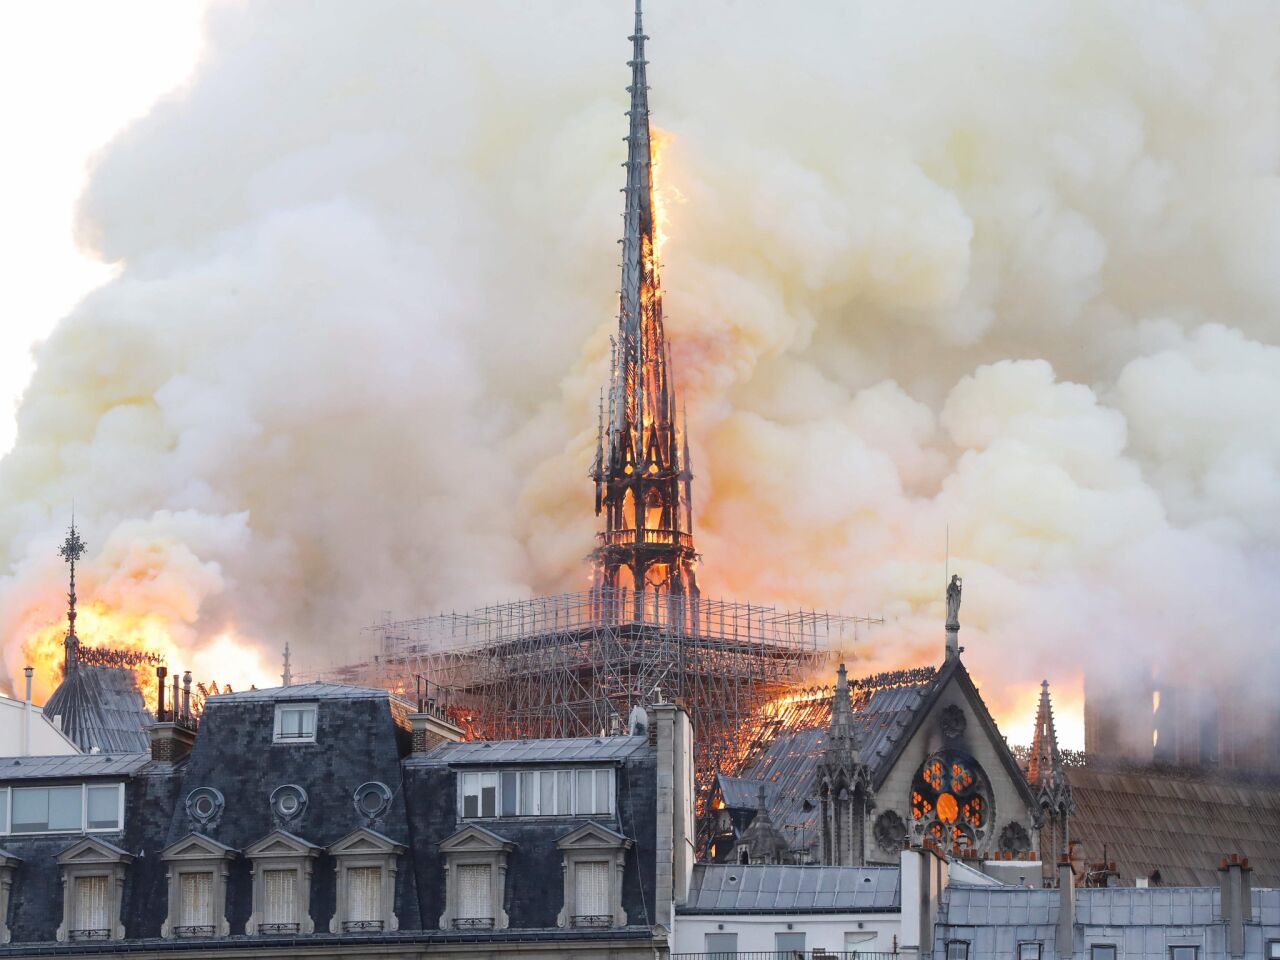 The roof at the back of Notre Dame Cathedral, behind the nave, is in flames.